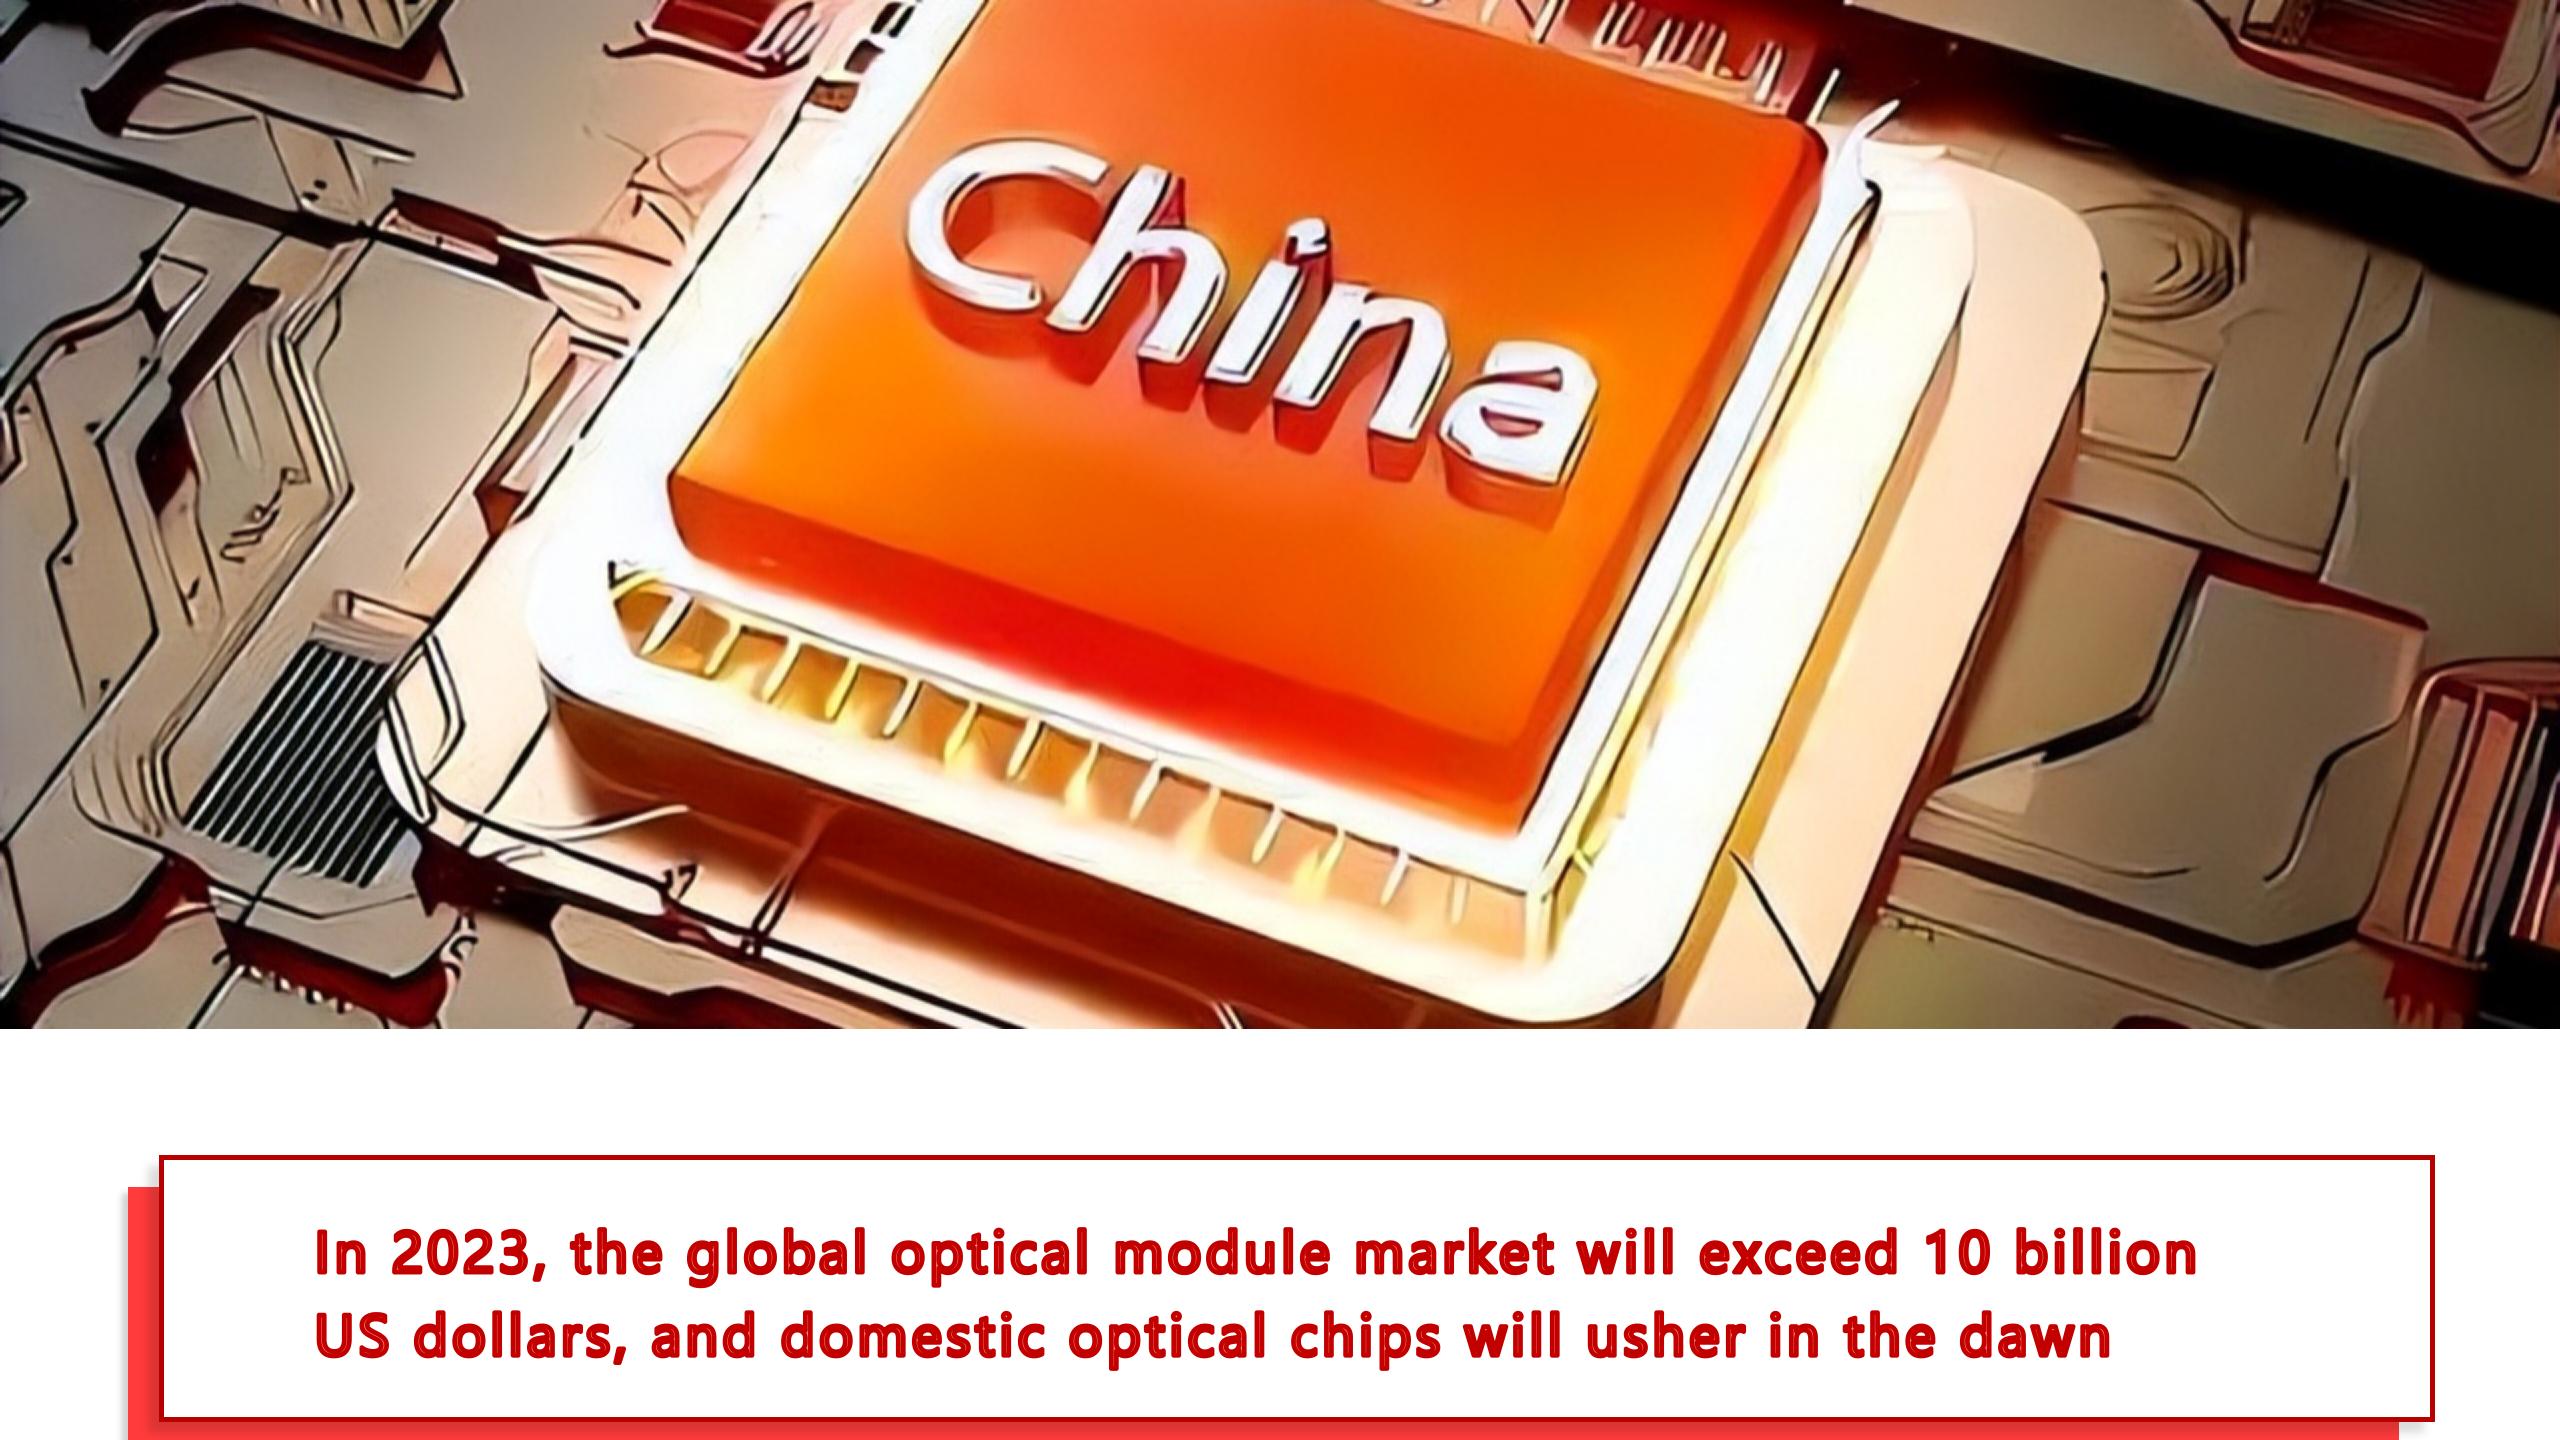 In 2023, The Global Optical Module Market Will Exceed 10 Billion US Dollars, And Domestic Optical Chips Will Usher in the Dawn